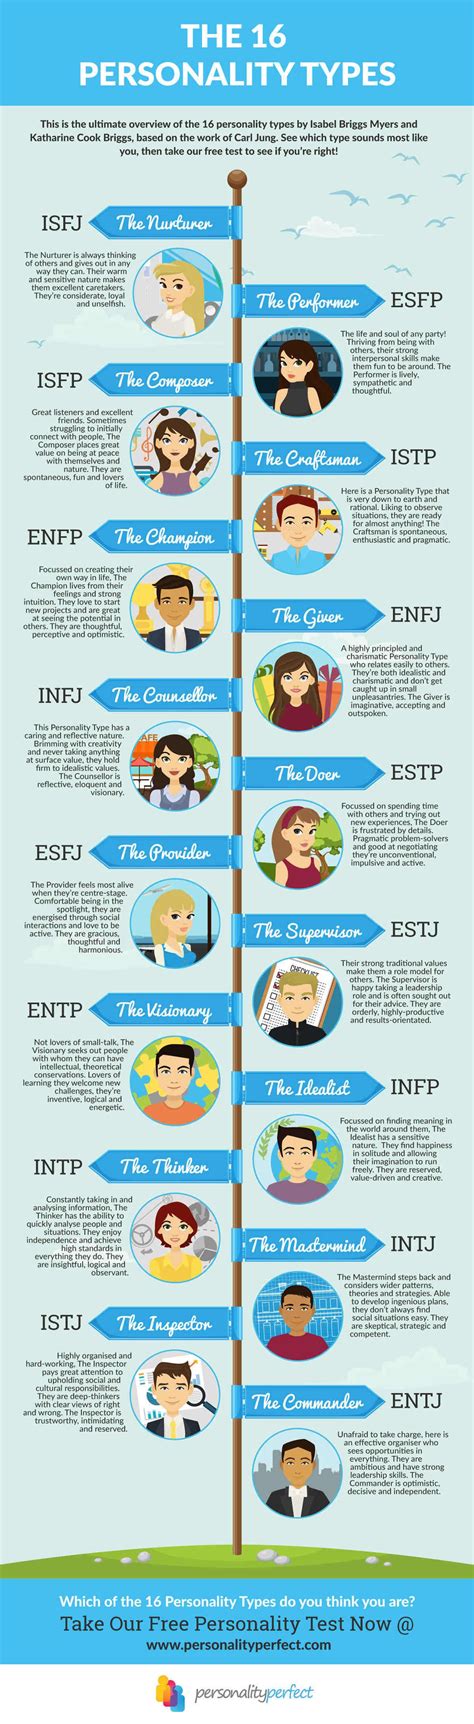 Myers Briggs Personality Types Overview What S Your Type Find Out